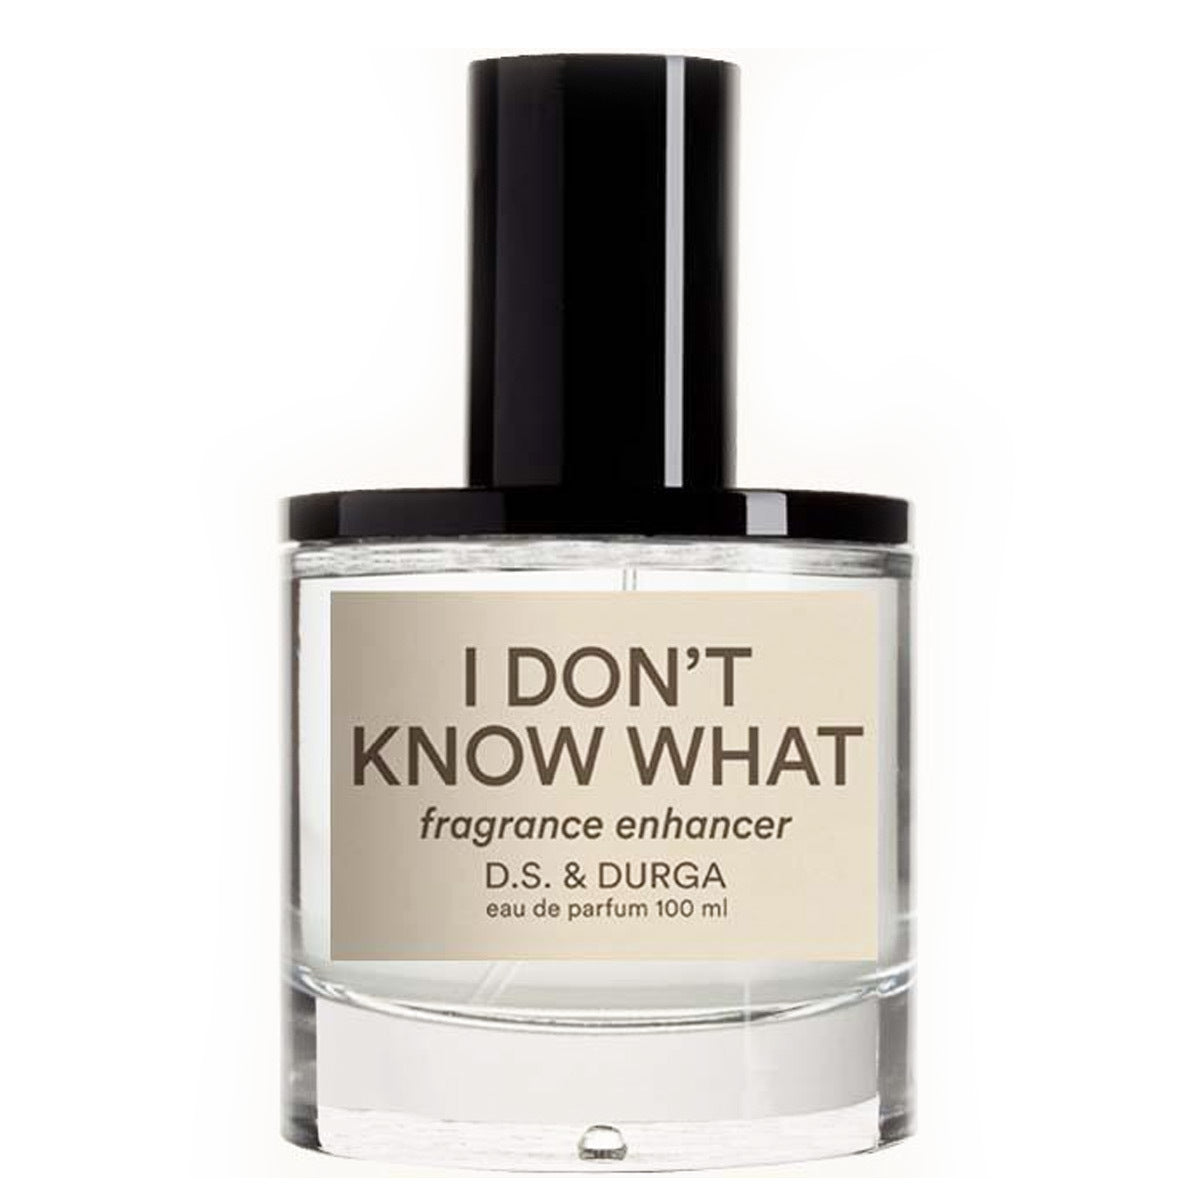 Primary image of I Don't Know What Fragrance Enhancer